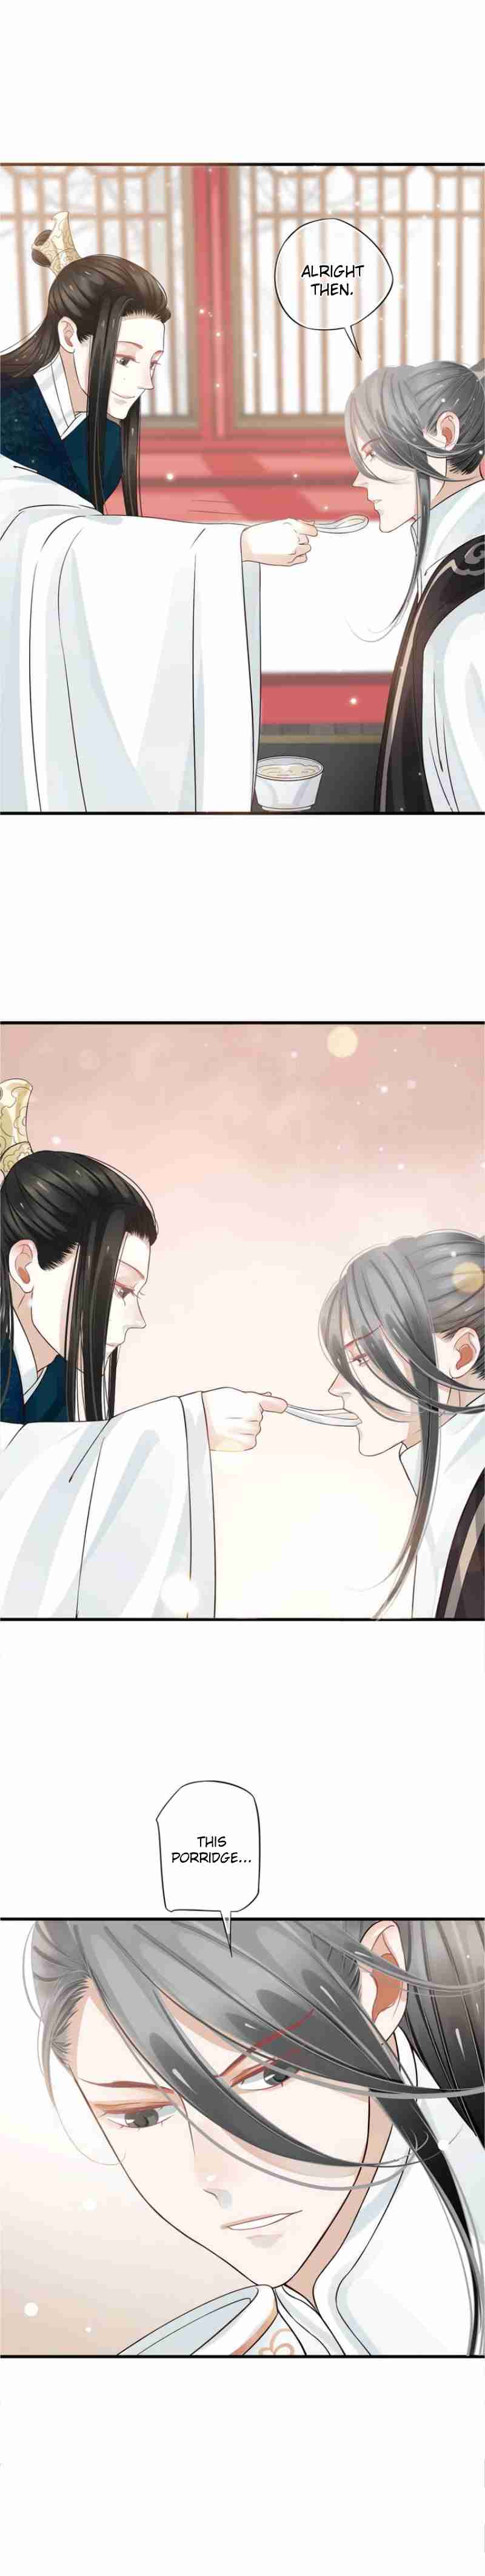 To Be Or Not To Be Ch. 24 Princess Yong Ning's godly assistance